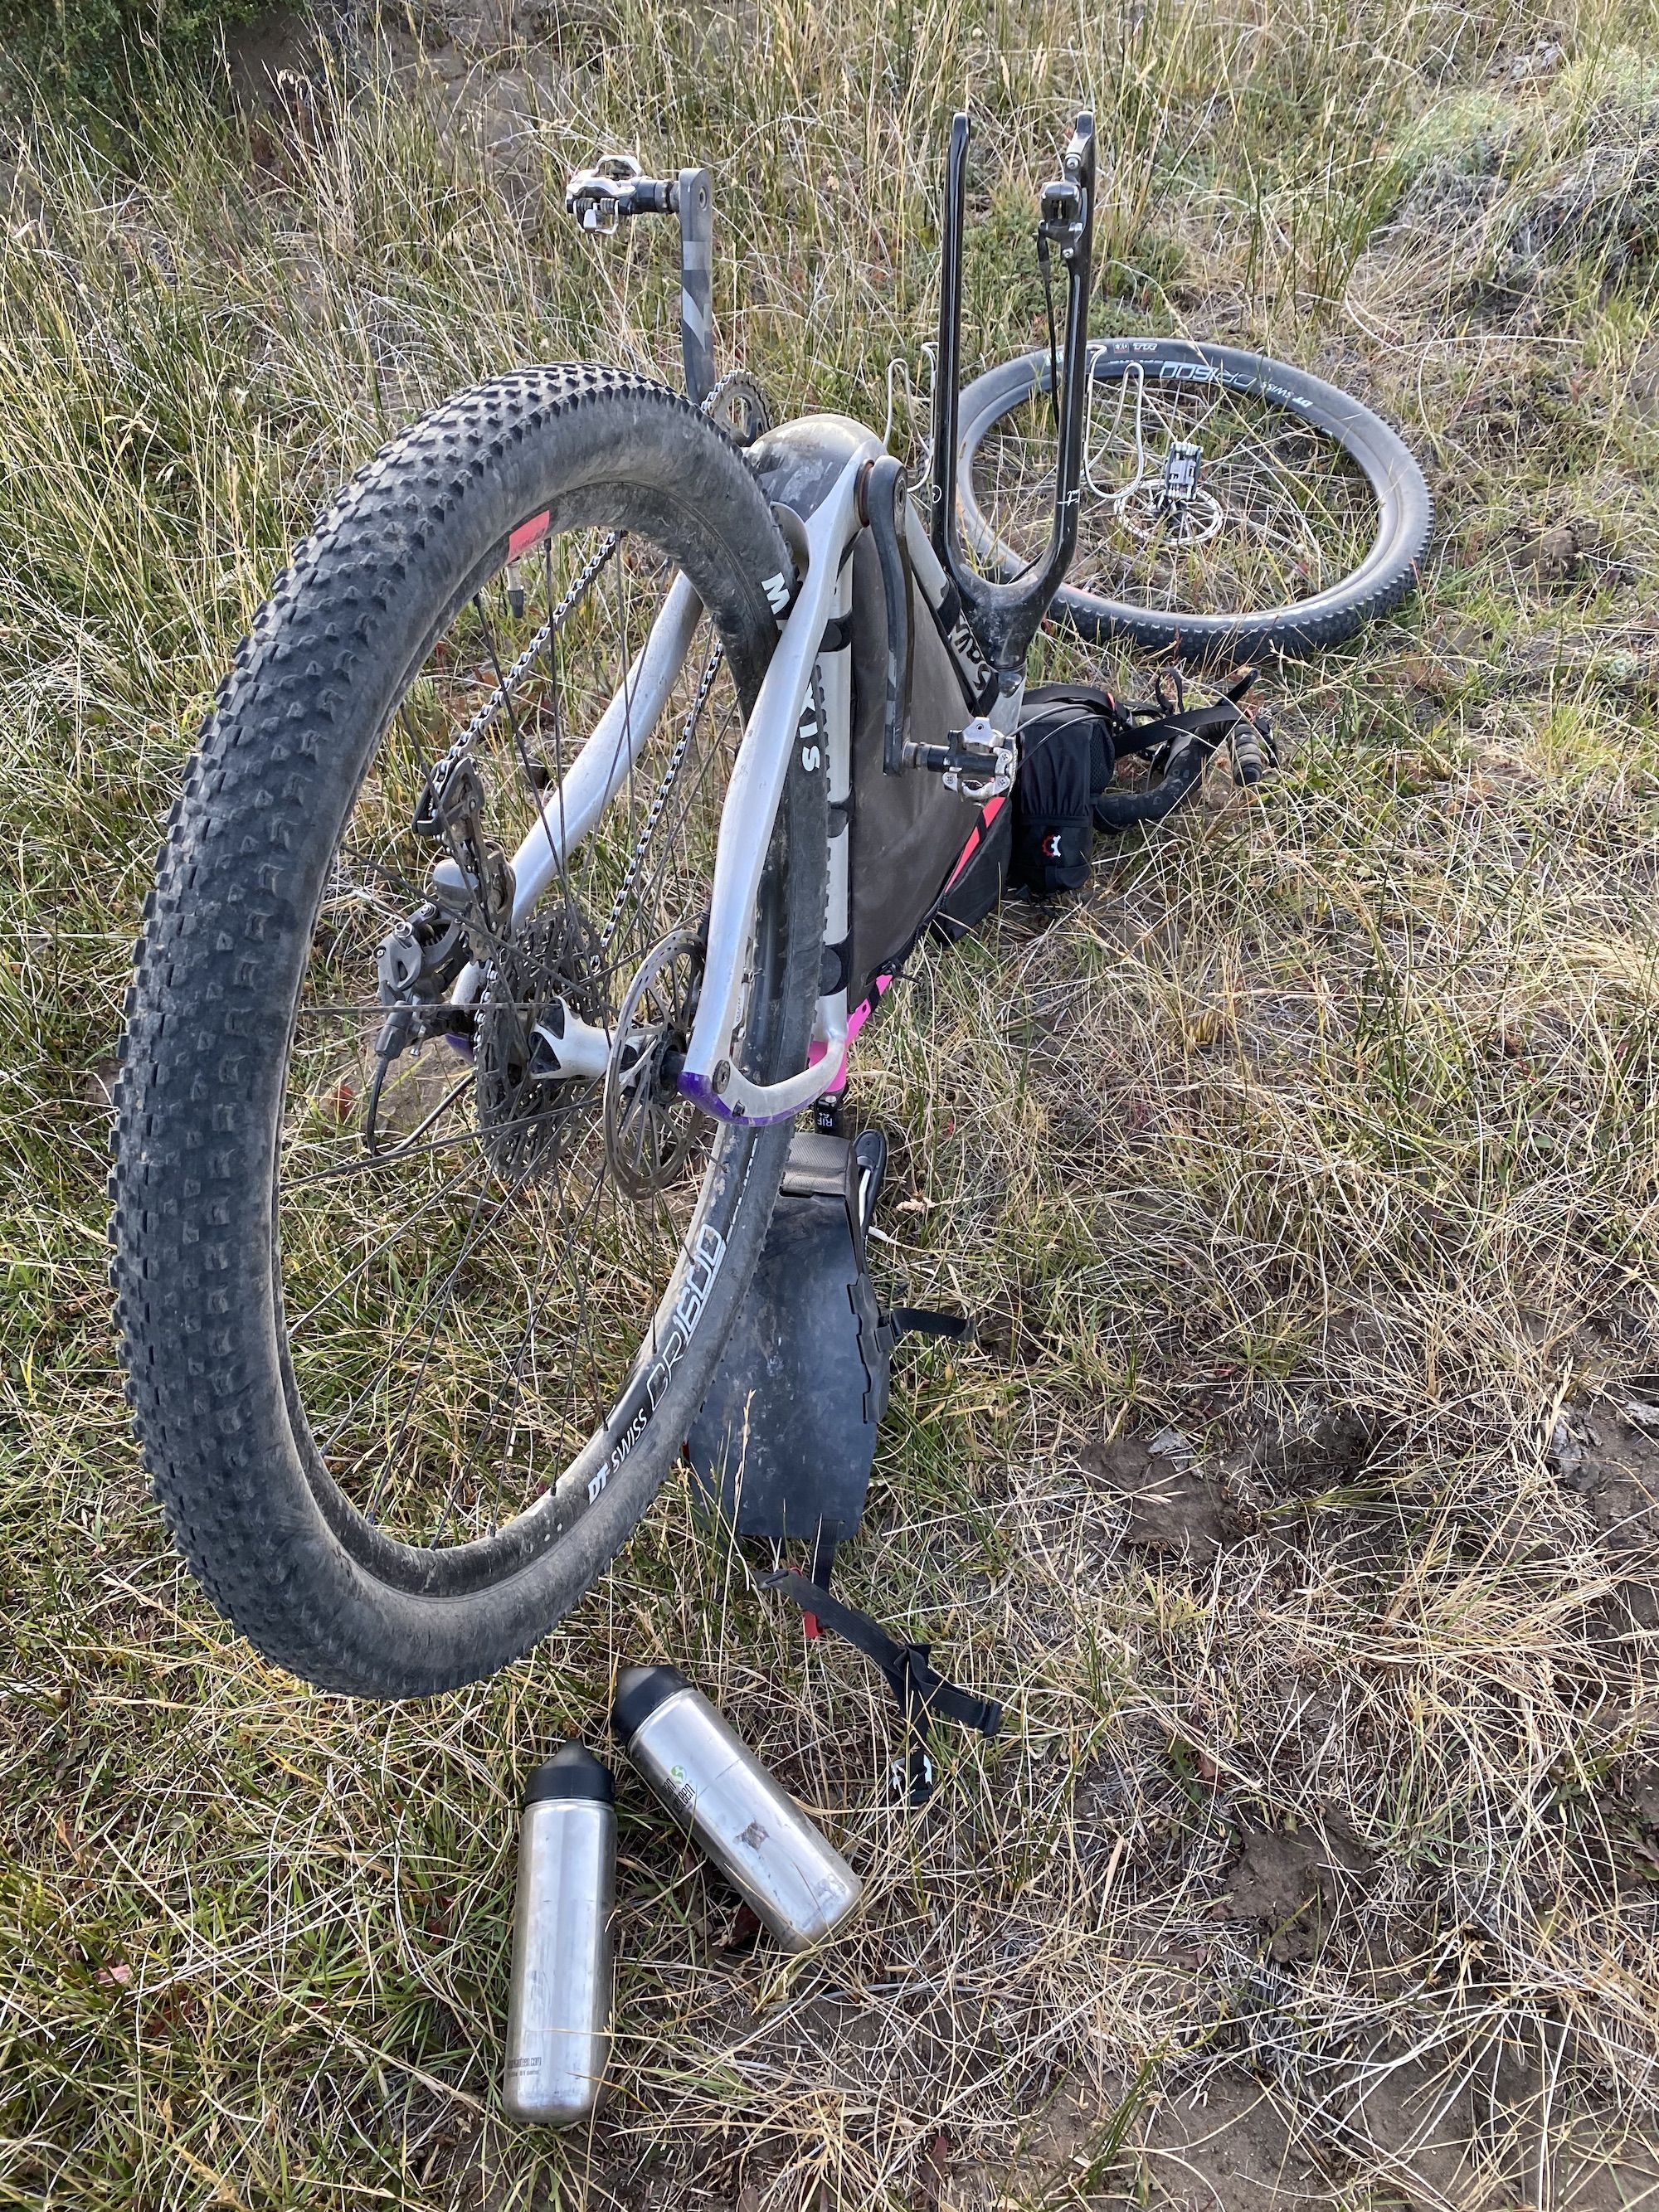 Bike upside down in tall grass. The front wheel is off. 